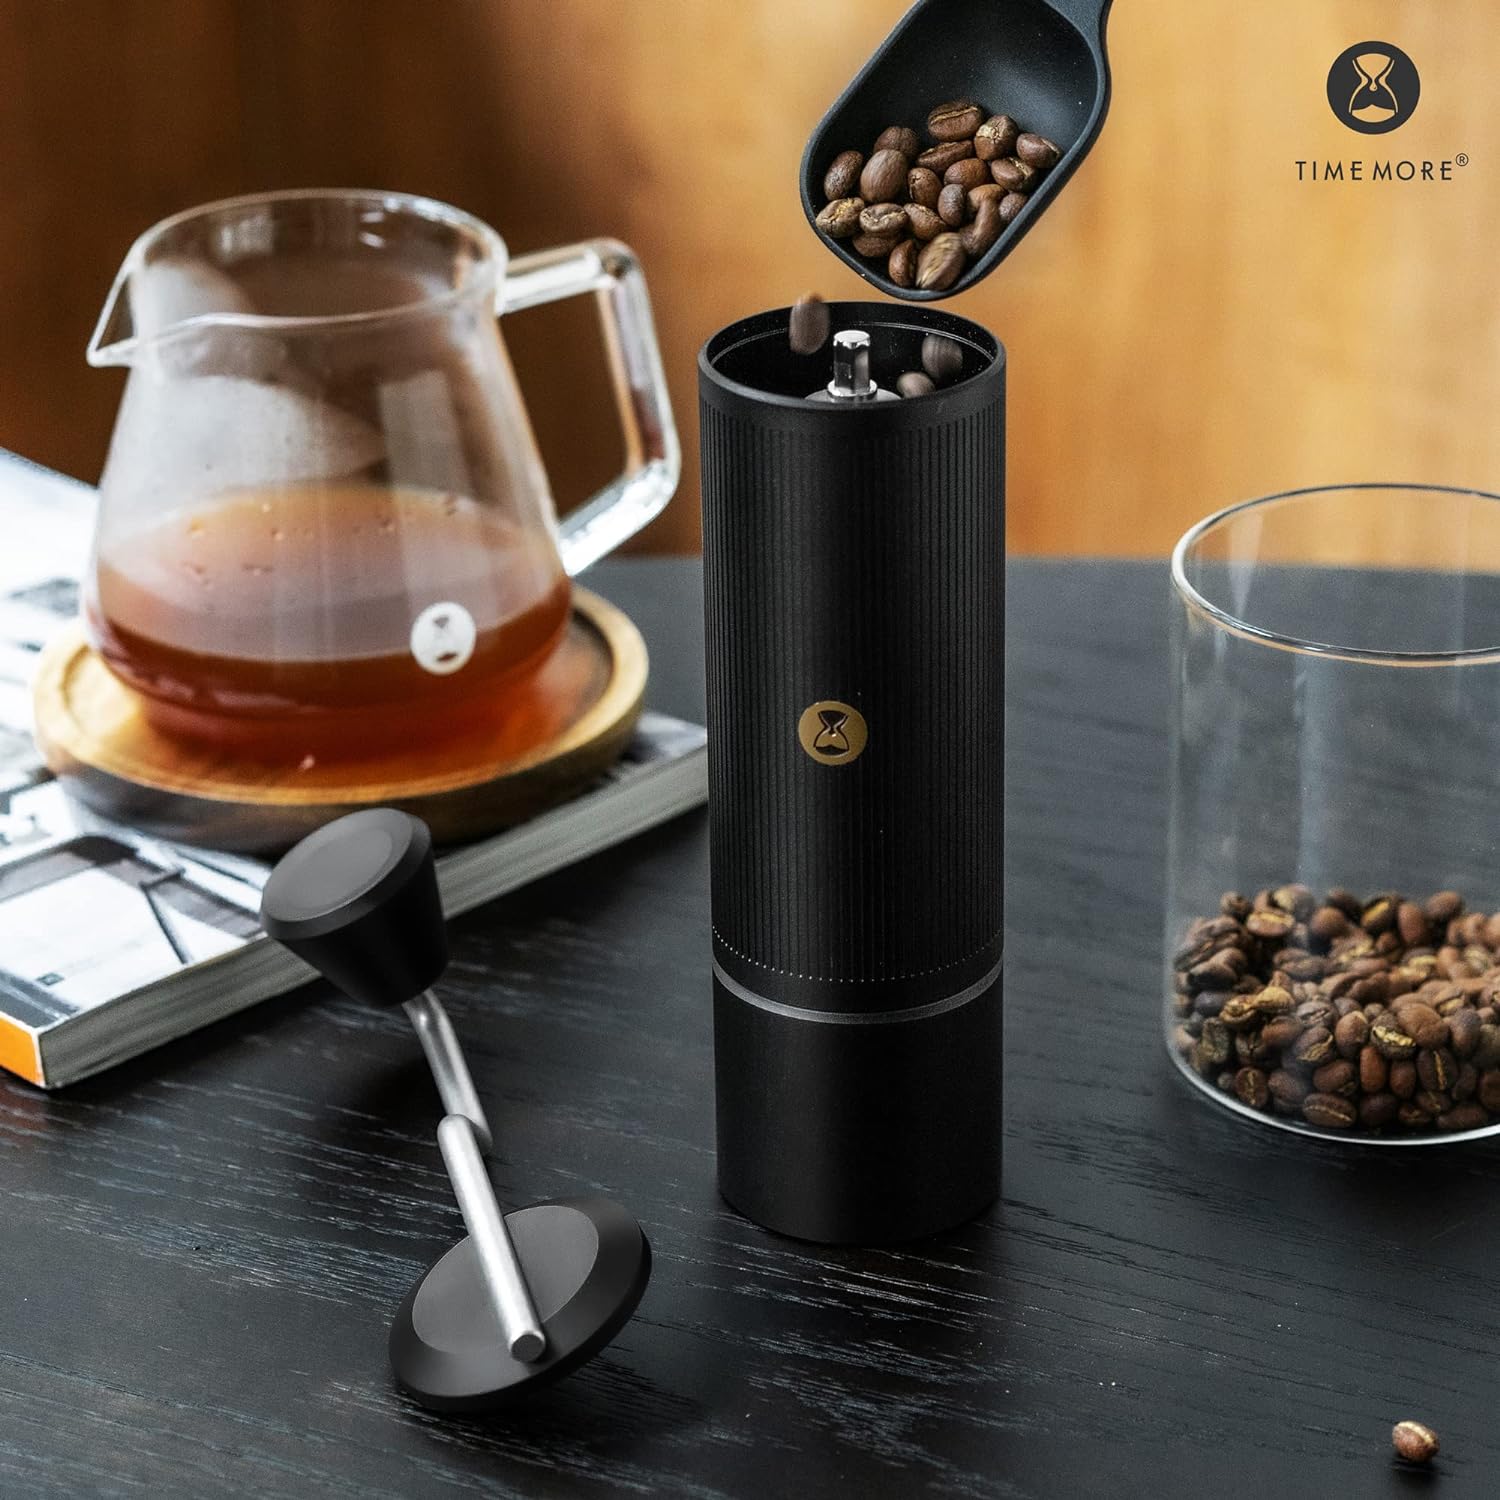 TIMEMORE Manual Coffee Grinder with Folding Handle, Small Hand Coffee Grinder with Stainless Steel Cone Grinder for Espresso to French Press - NANO, Black